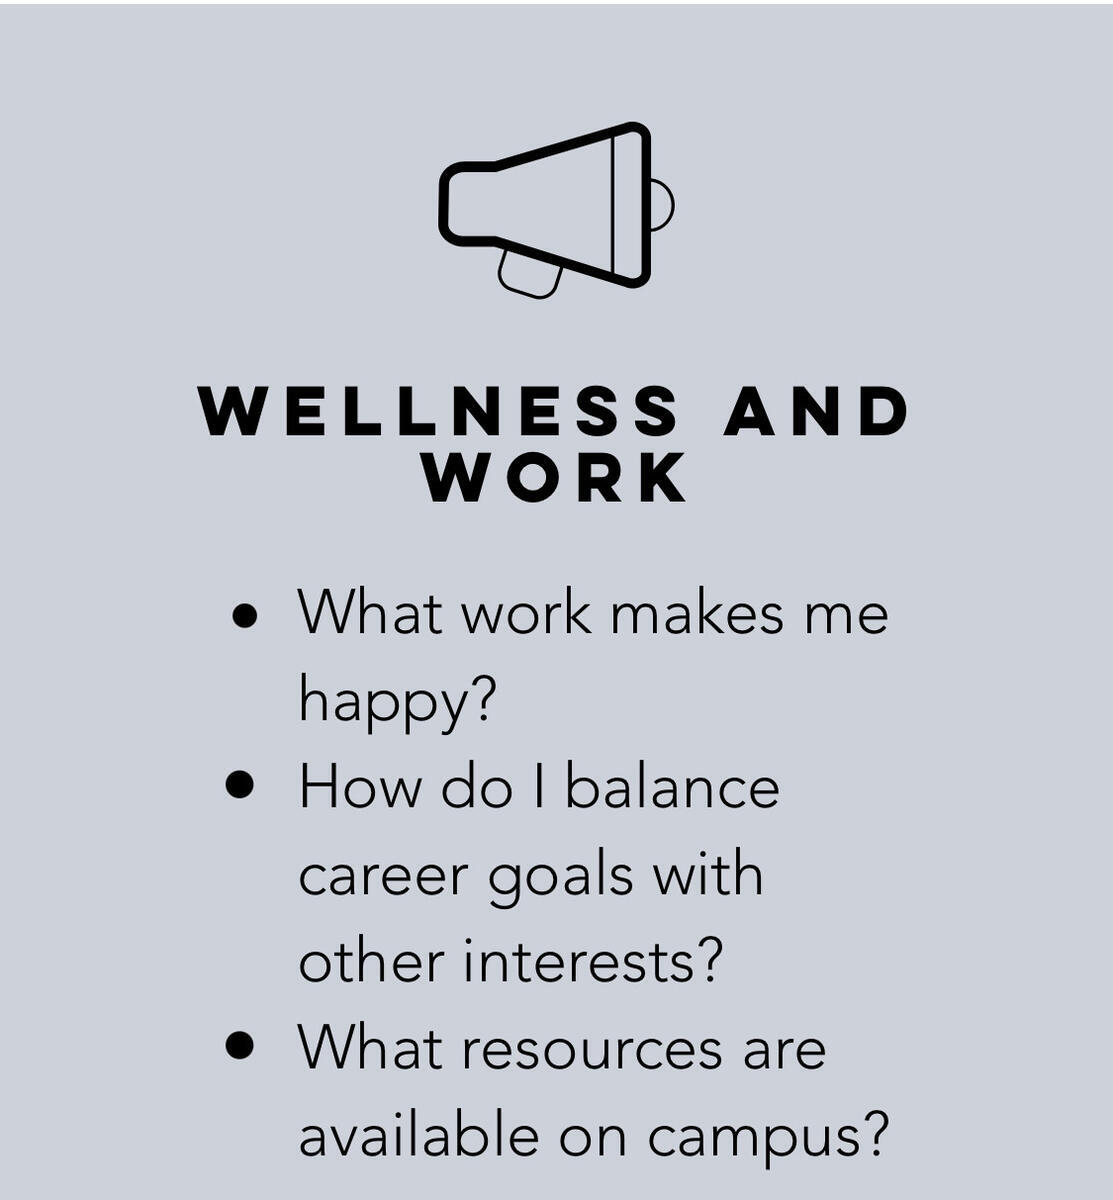 wellness and work. What work makes me happy? How do I balance career goals with other interests? What resources are available on campus?